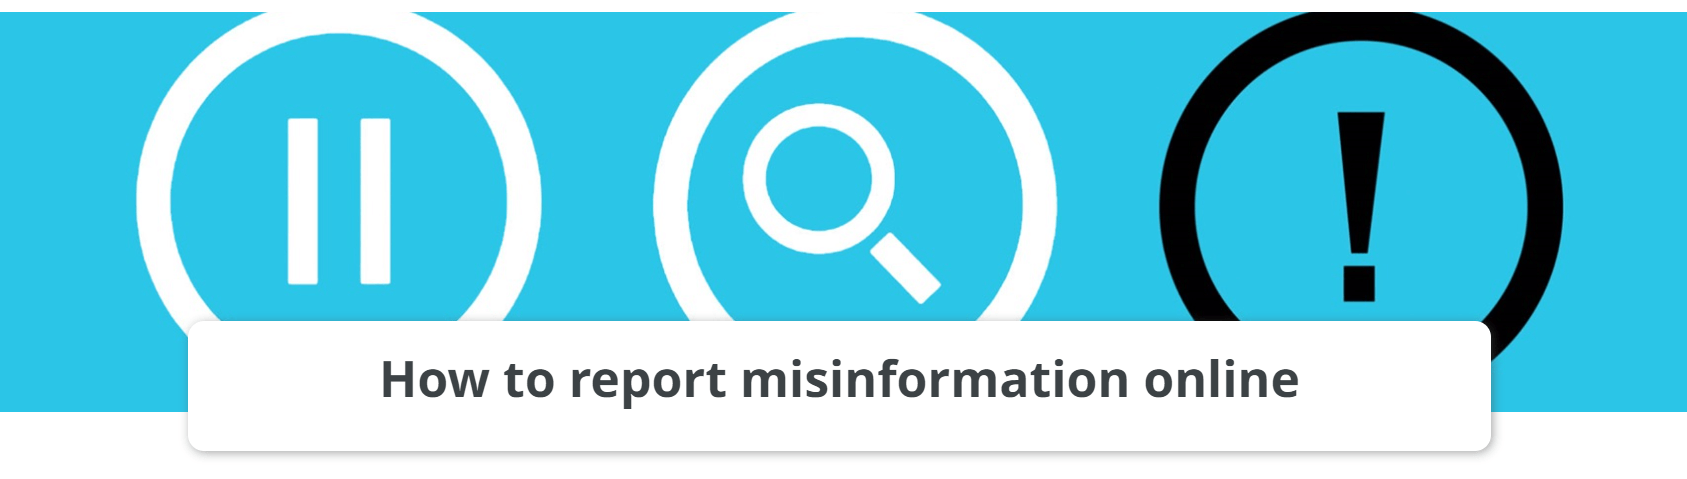 How to report misinformation online